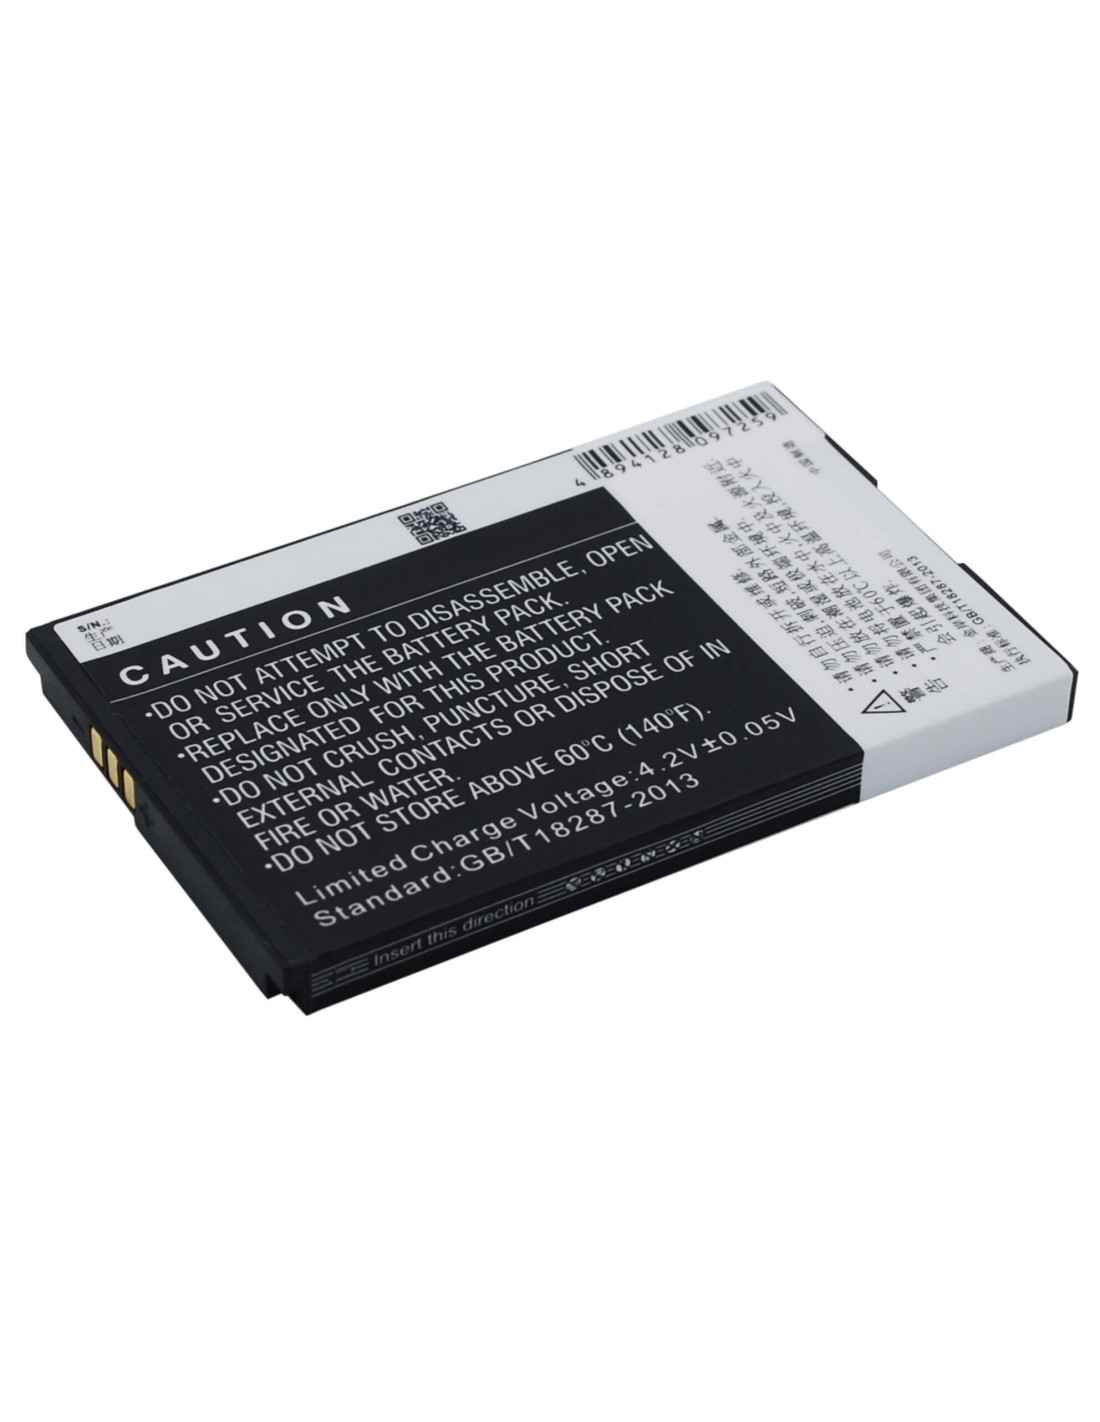 Battery for Coolpad 8010 3.7V, 1200mAh - 4.44Wh